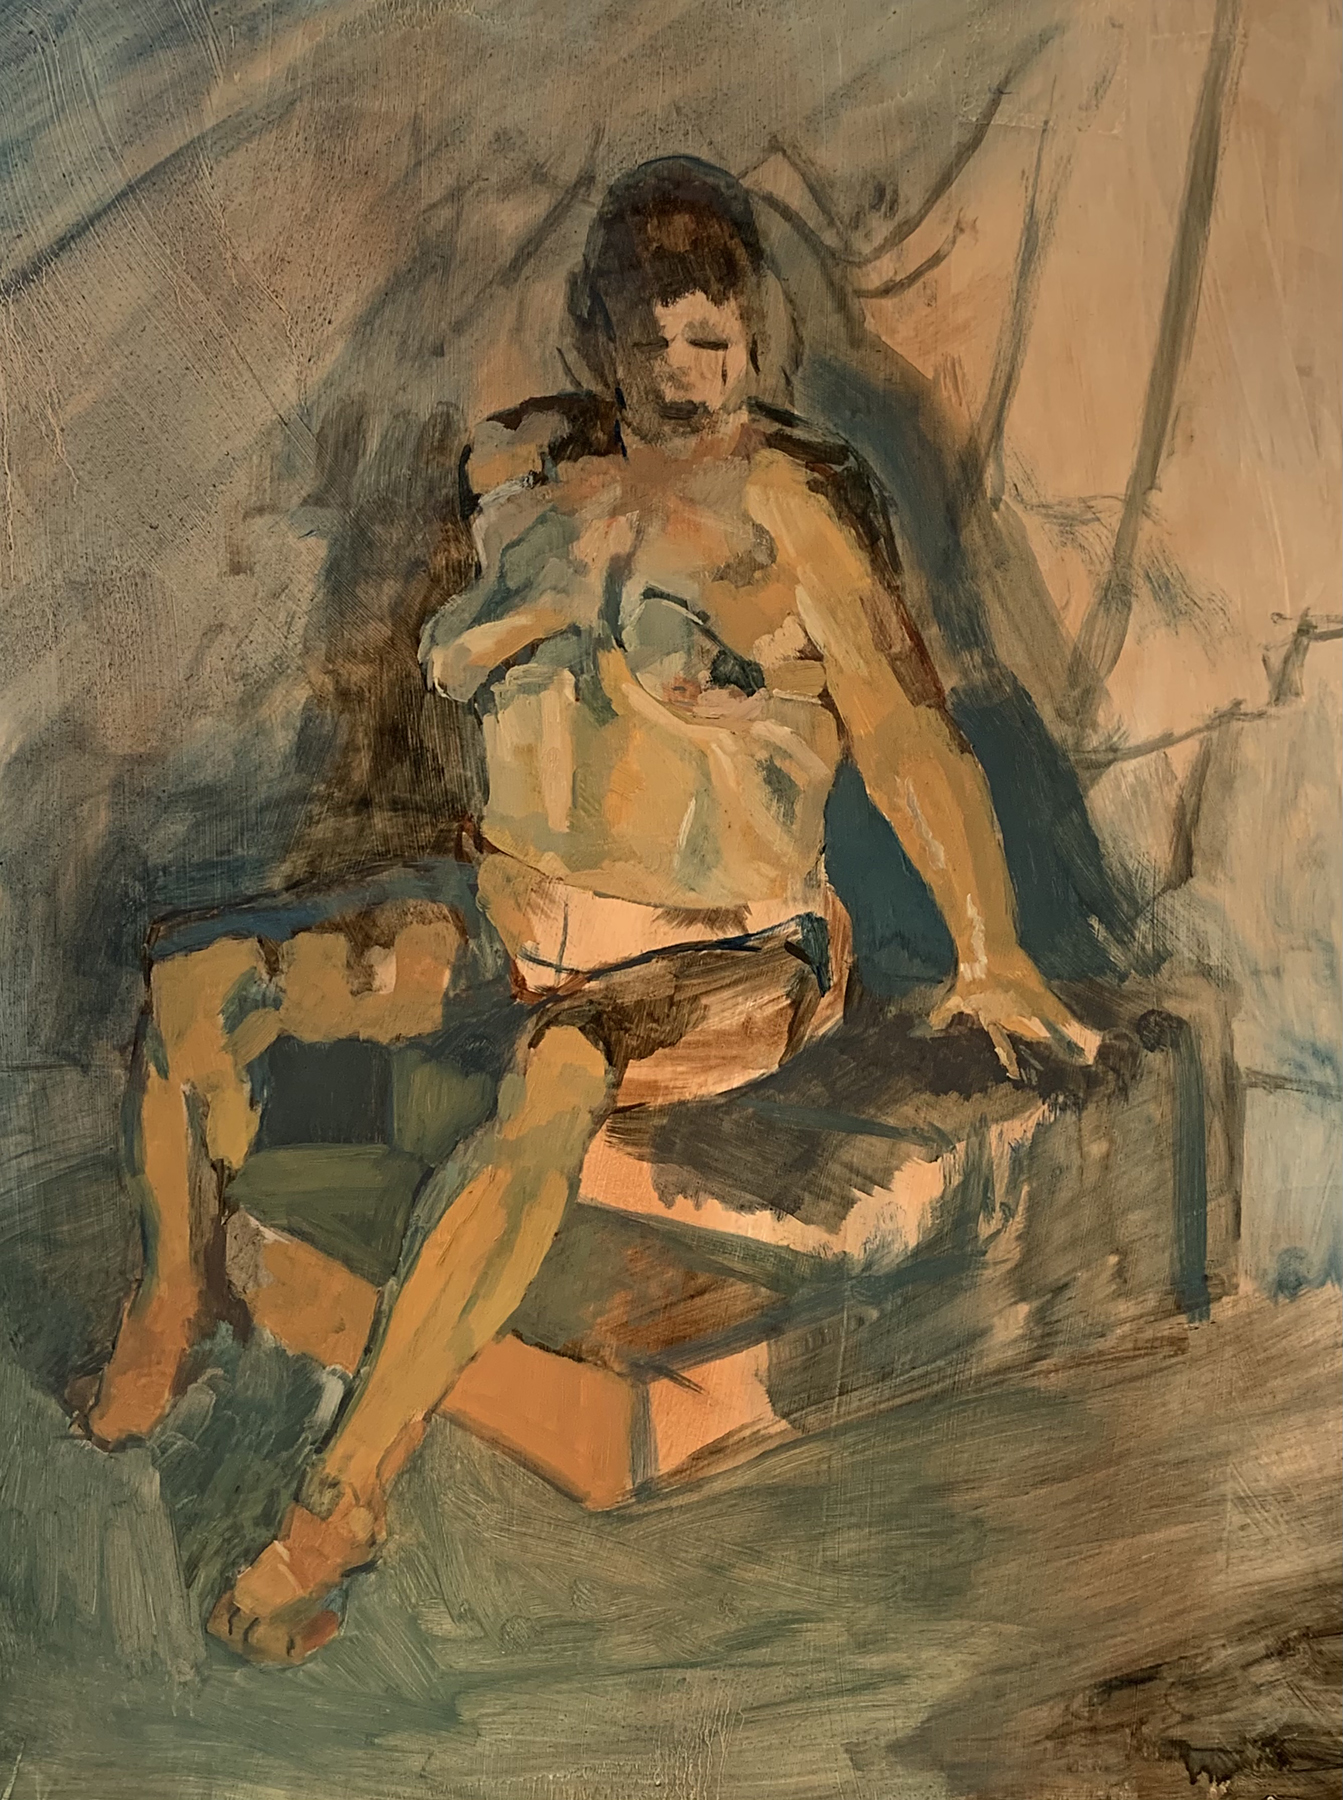 Abstracted depiction of a nude human figure seated on some stairs. They are rendered in shades of gold and the background is shades of blue and green.